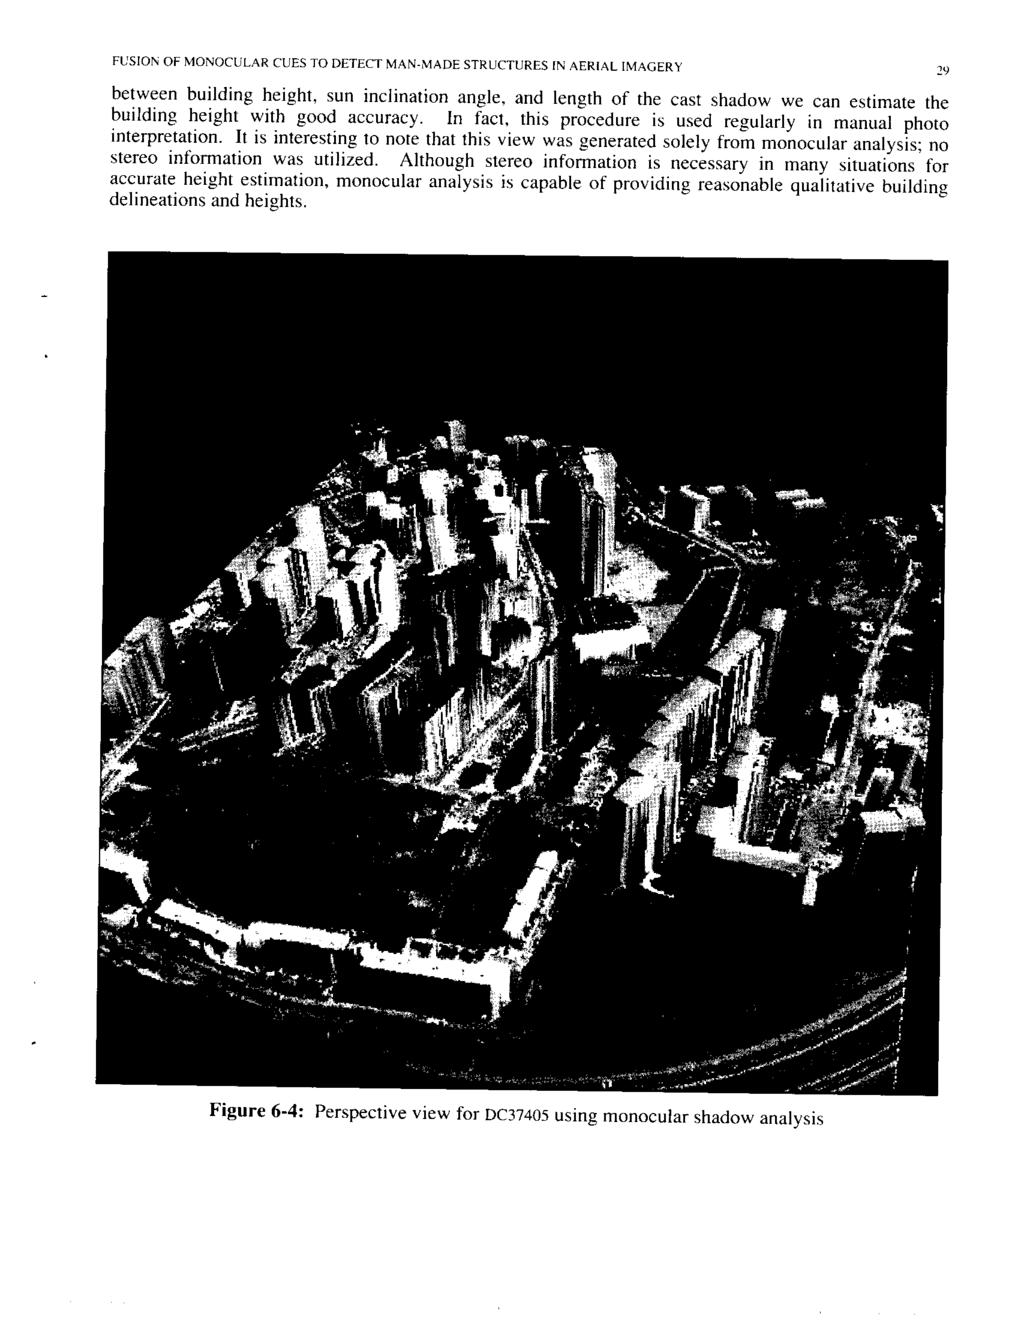 FUSION OF MONOCULAR CUES TO DETECT MAN-MADE STRUCTURES IN AERIAL IMAGERY 29 between building height, sun inclination angle, and length of the cast shadow we can estimate the building height with good